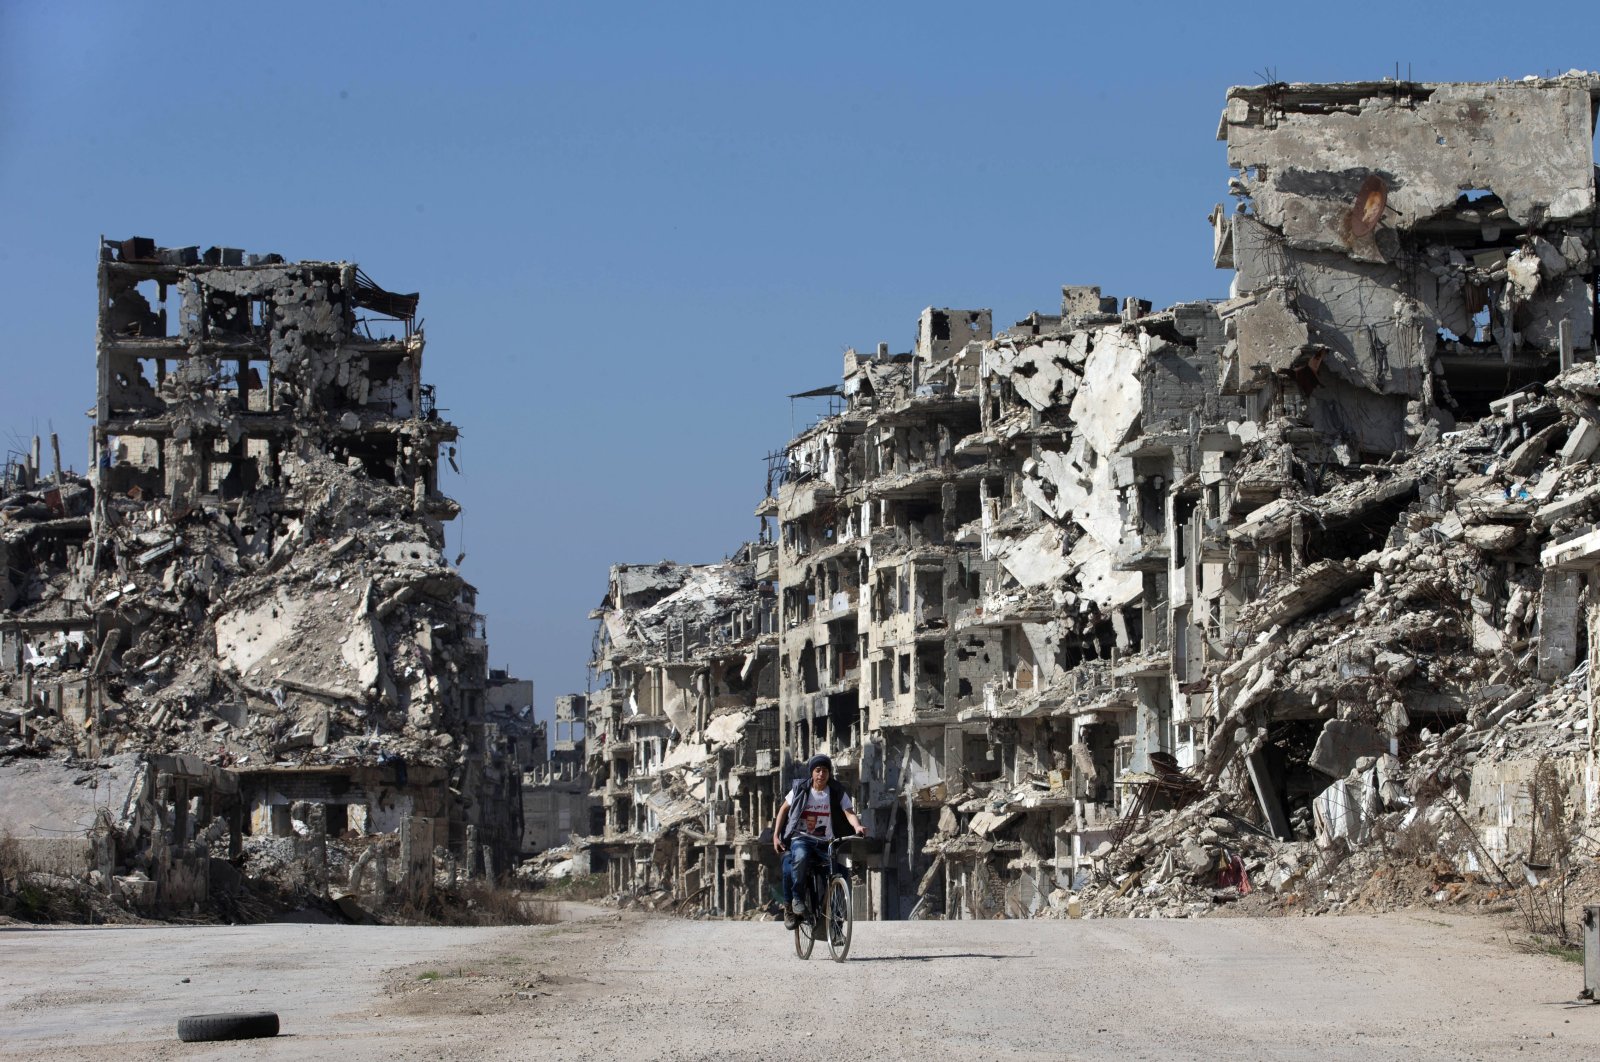 A Syrian boy rides a bicycle through a devastated part of the old city of Homs, Syria, Feb. 26, 2016. (AP Photo)